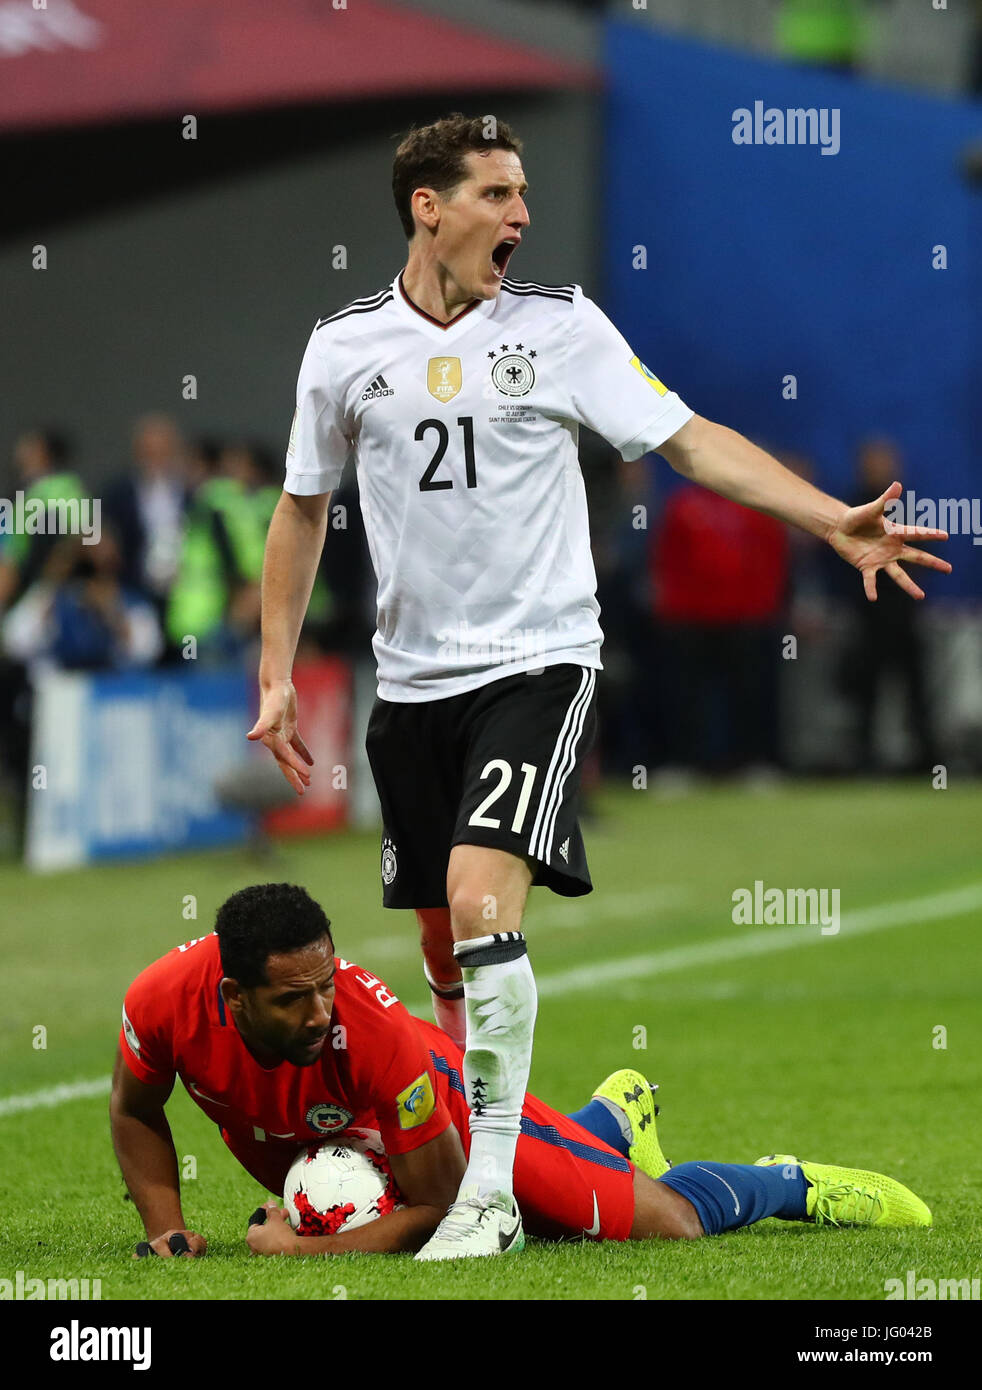 Saint Petersburg, Russia. 2nd July, 2017. Germany's Sebastian Rudy stands next to Chile's Jean Beausejour lying on the ground during the Confederations Cup finale between Chile and Germany at the Saint Petersburg Stadium in Saint Petersburg, Russia, 2 July 2017. Photo: Christian Charisius/dpa/Alamy Live News Stock Photo